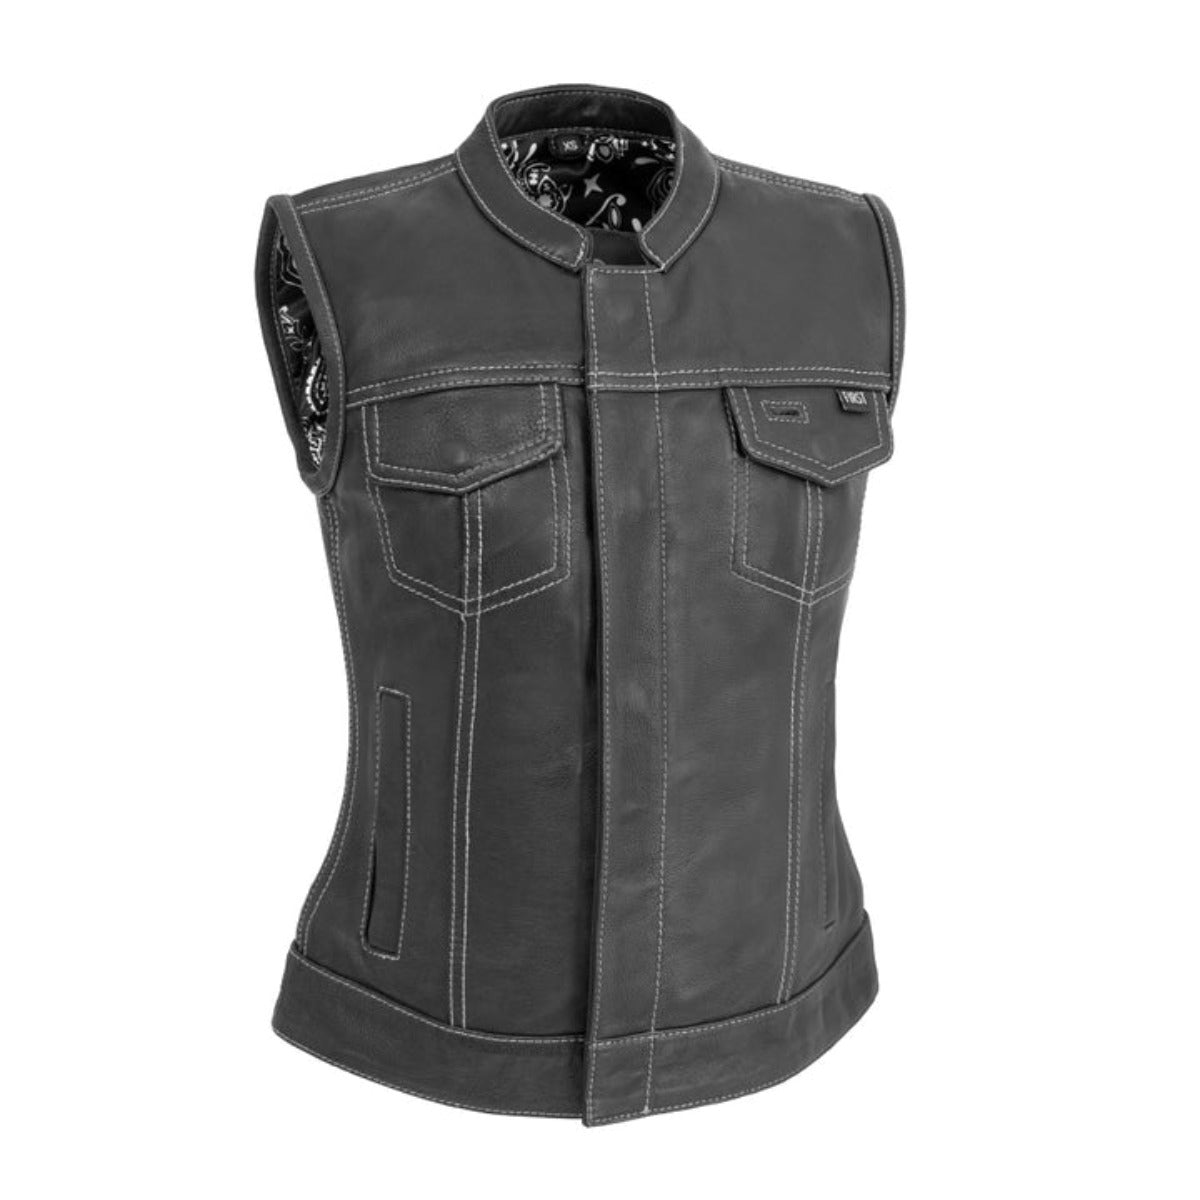 First Manufacturing Jessica - Women's Motorcycle Leather Vest, Black/White